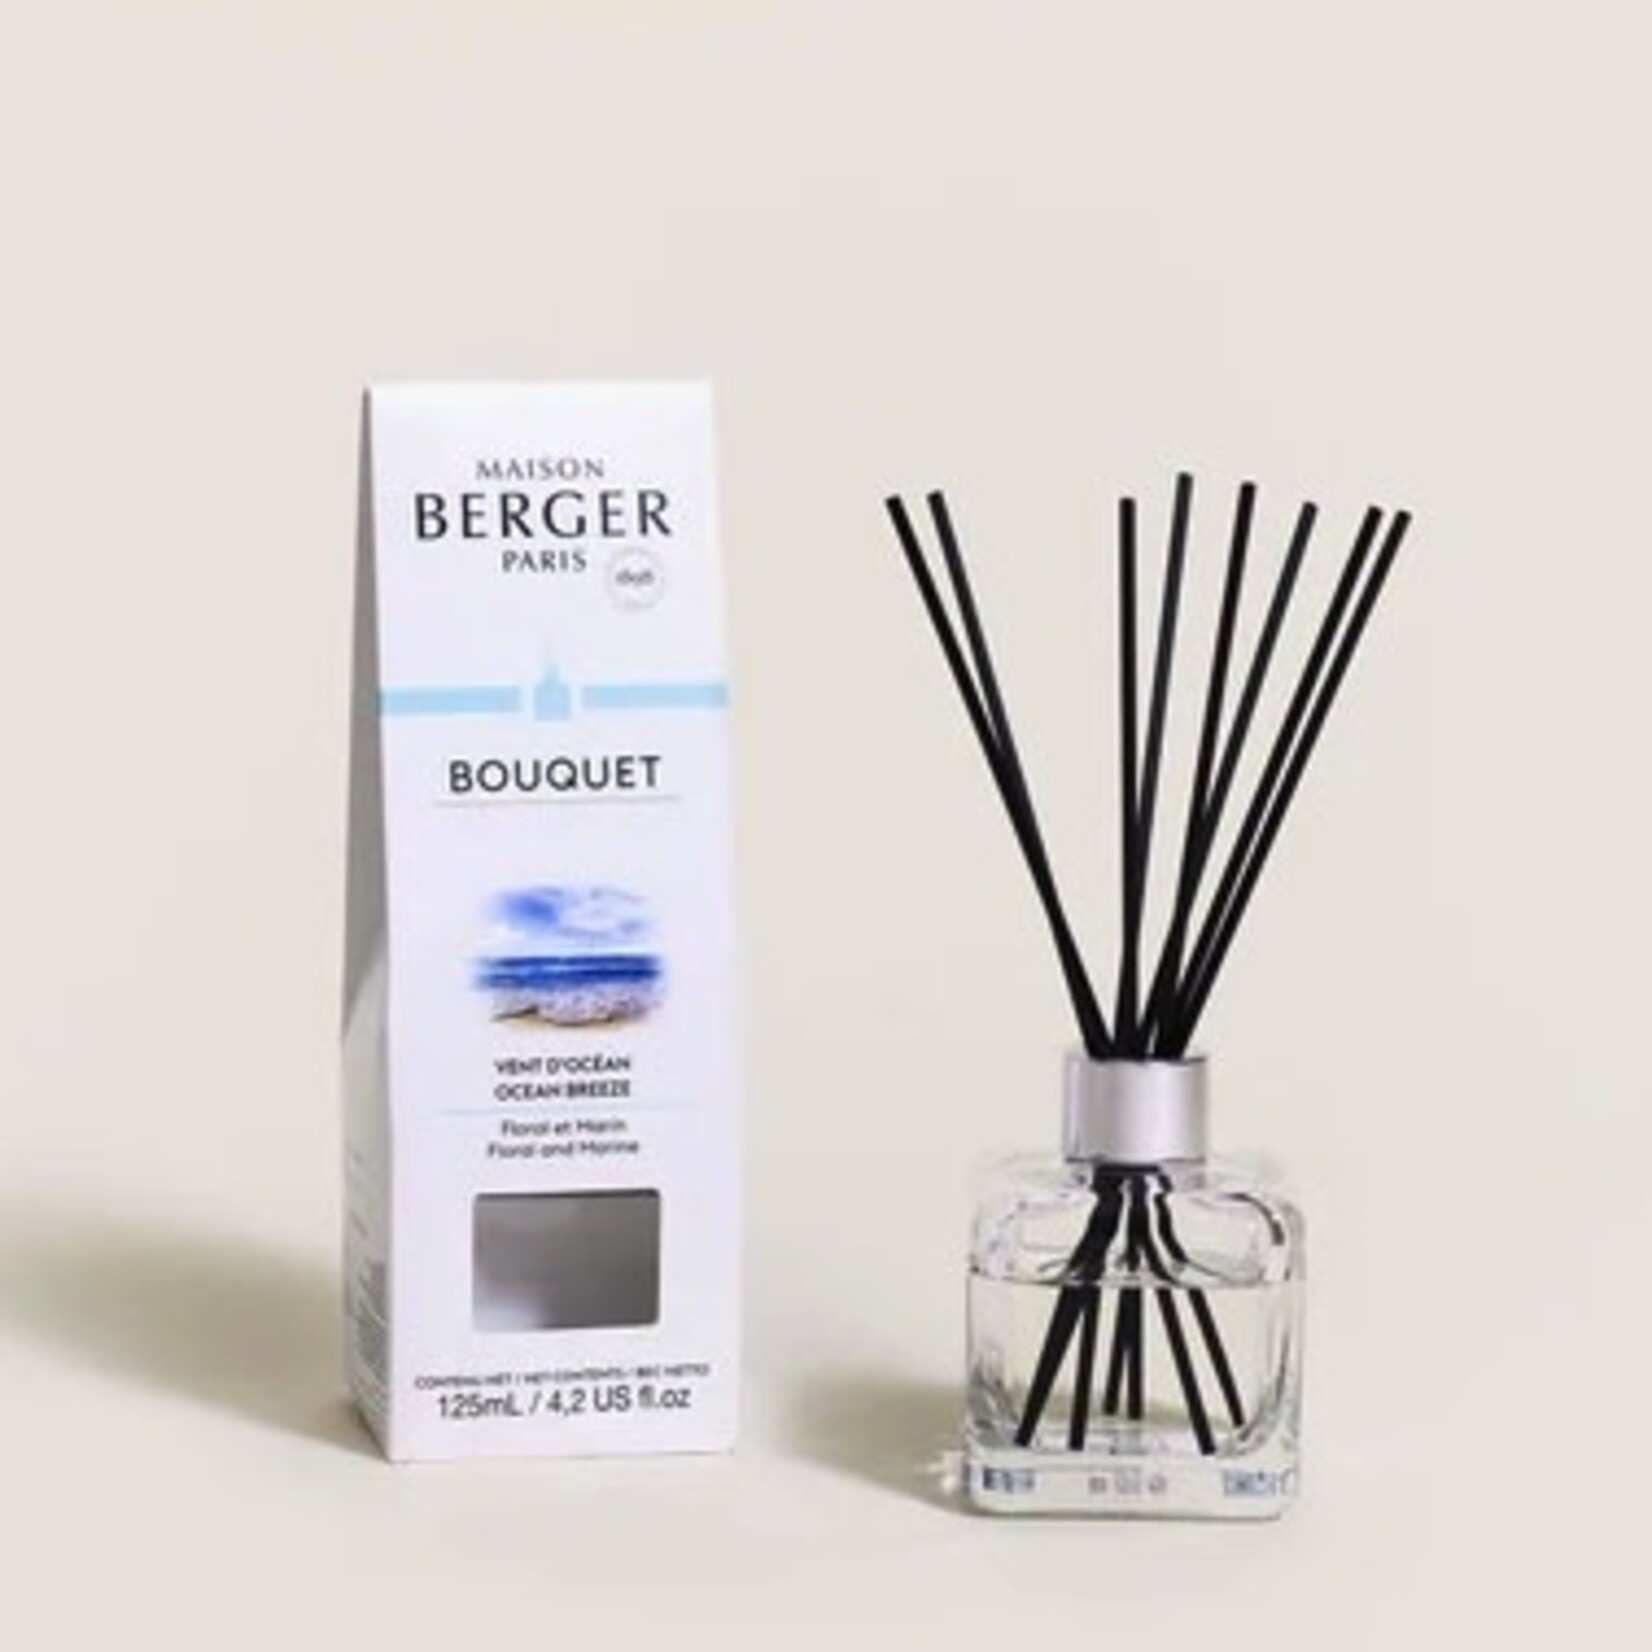 Maison Berger Paris Pre-filled Cube Reed Diffuser with Ocean Breeze